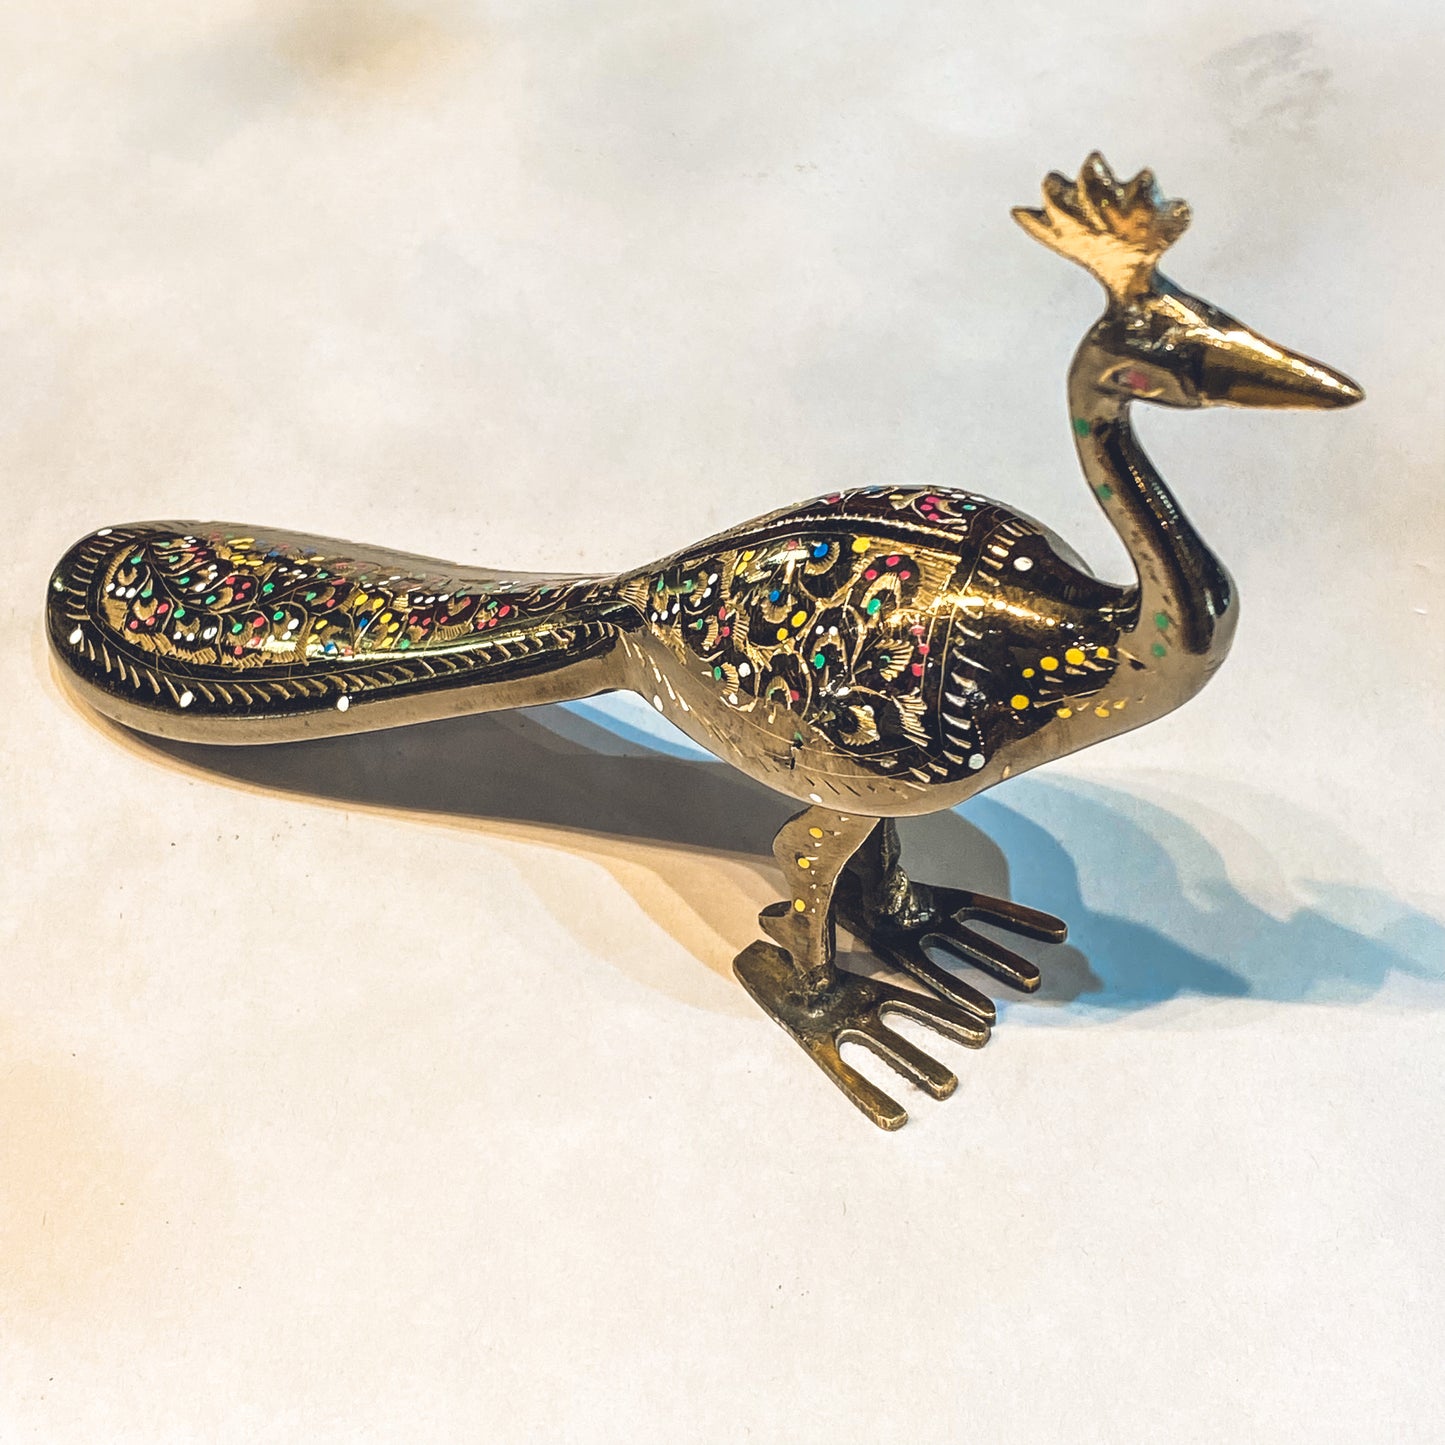 Brass Handcrafted Peacock - 20cm - Rivendell Shop